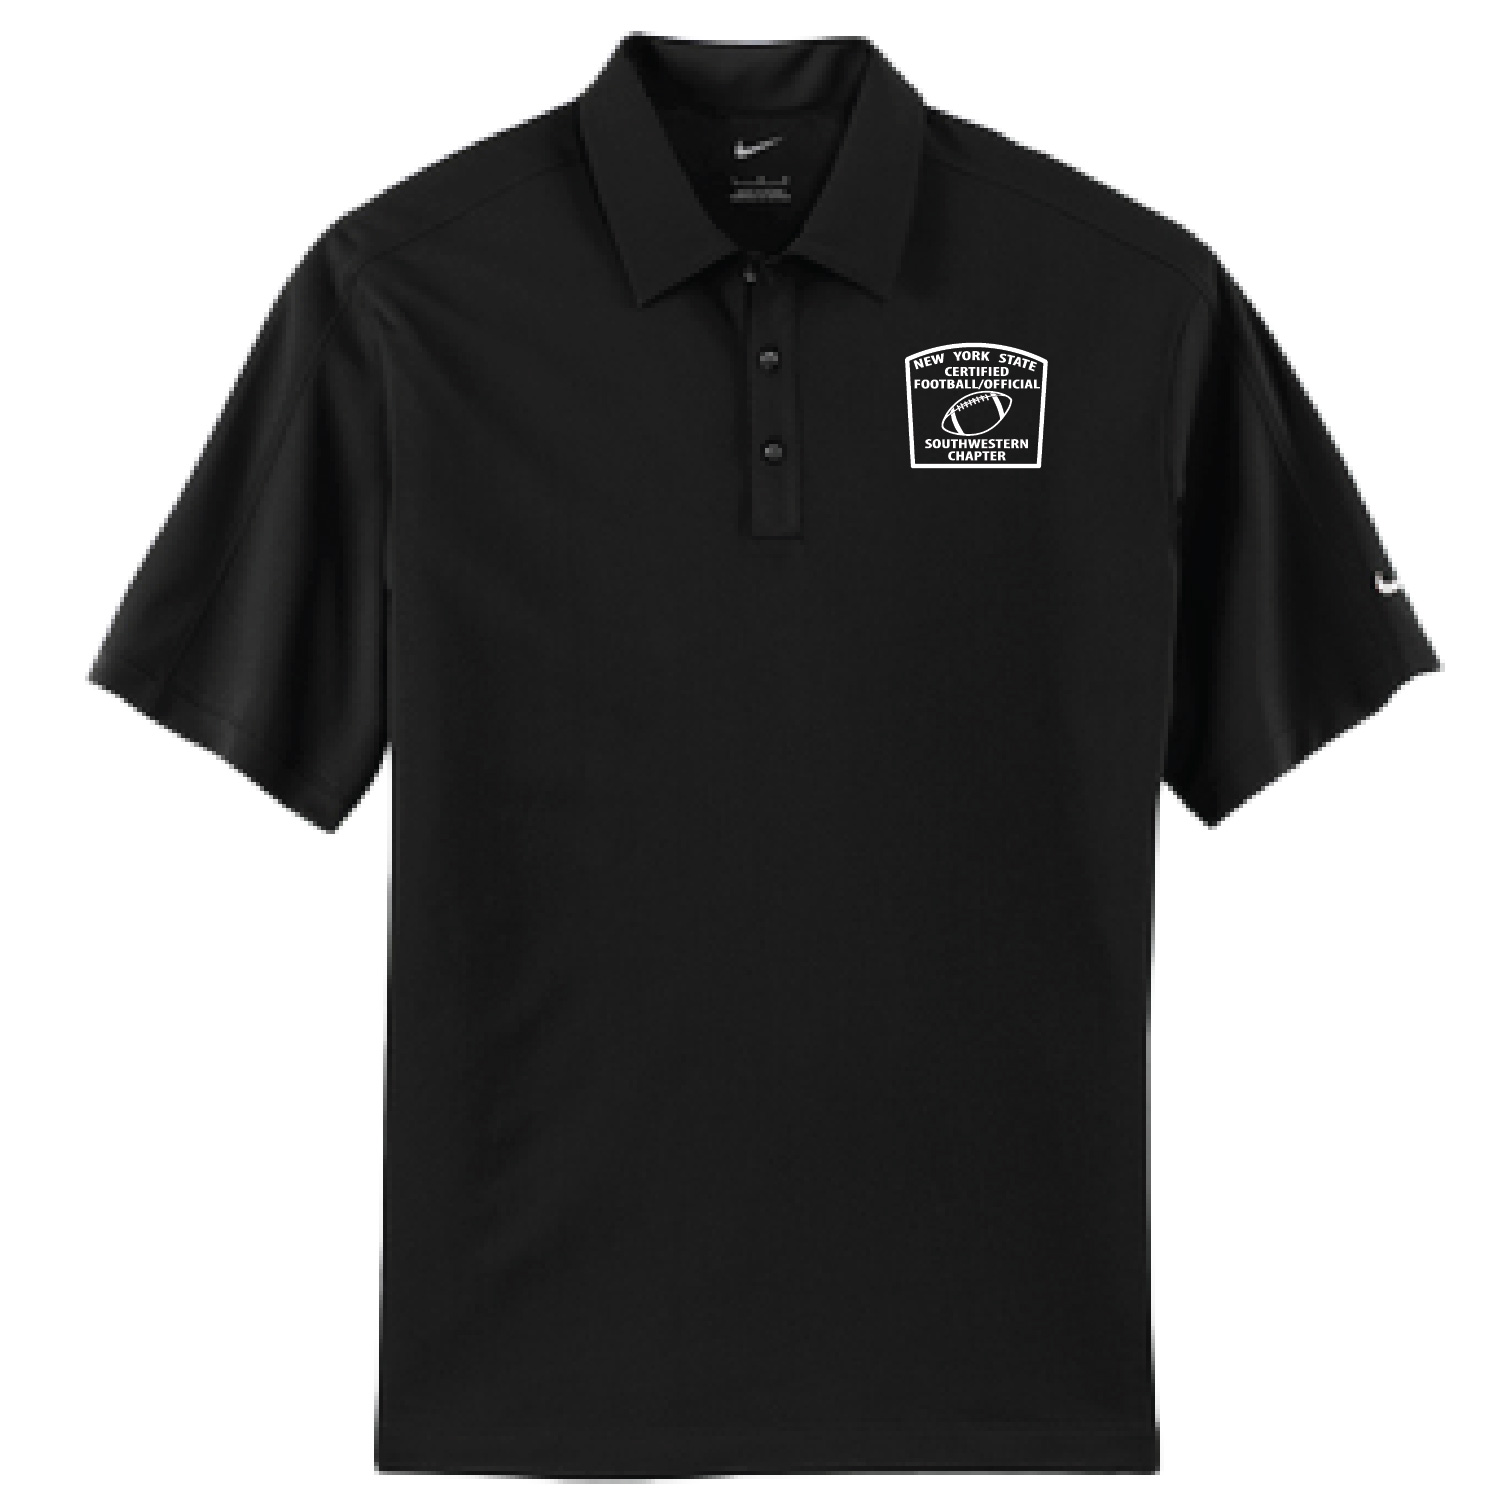 NYS Certified Football Official Apparel- Nike Dri-Fit Polo- Emb. product image